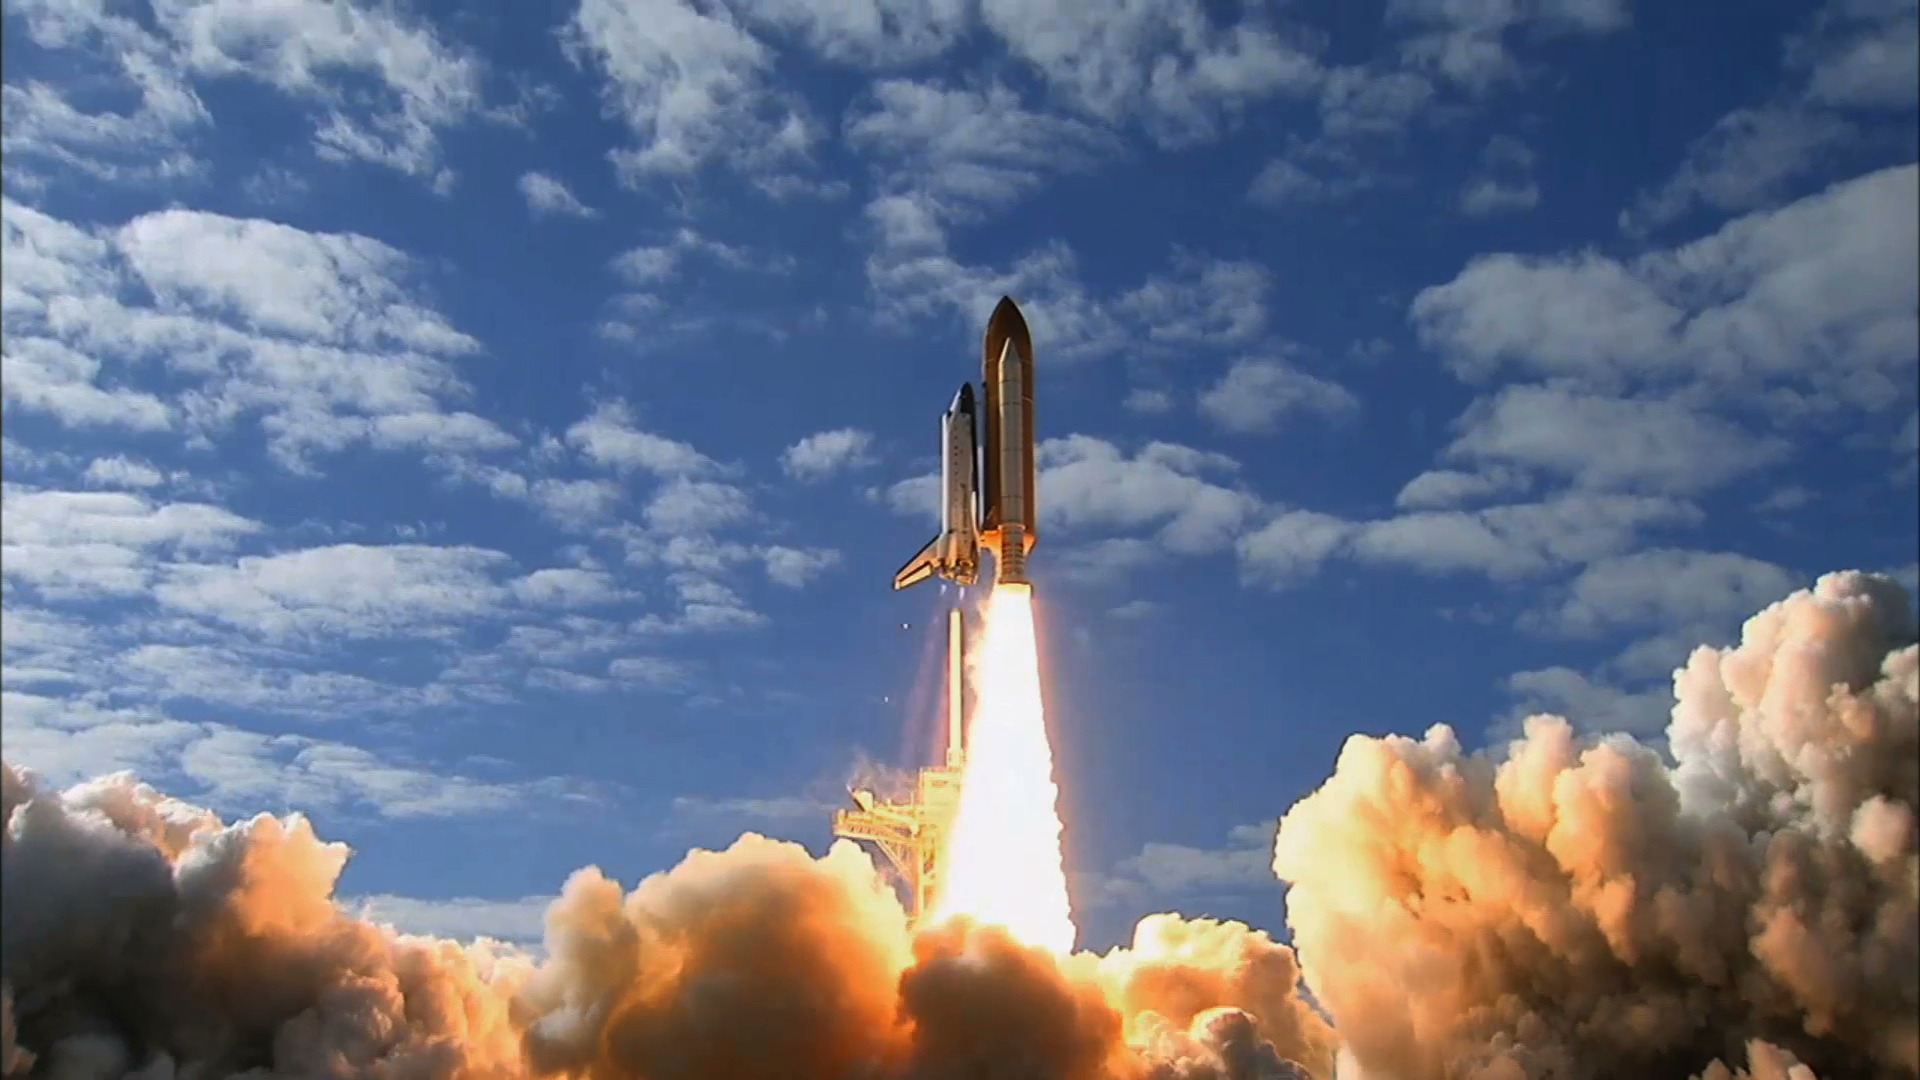 The marvelous life of a historic space shuttle | SciTech Now